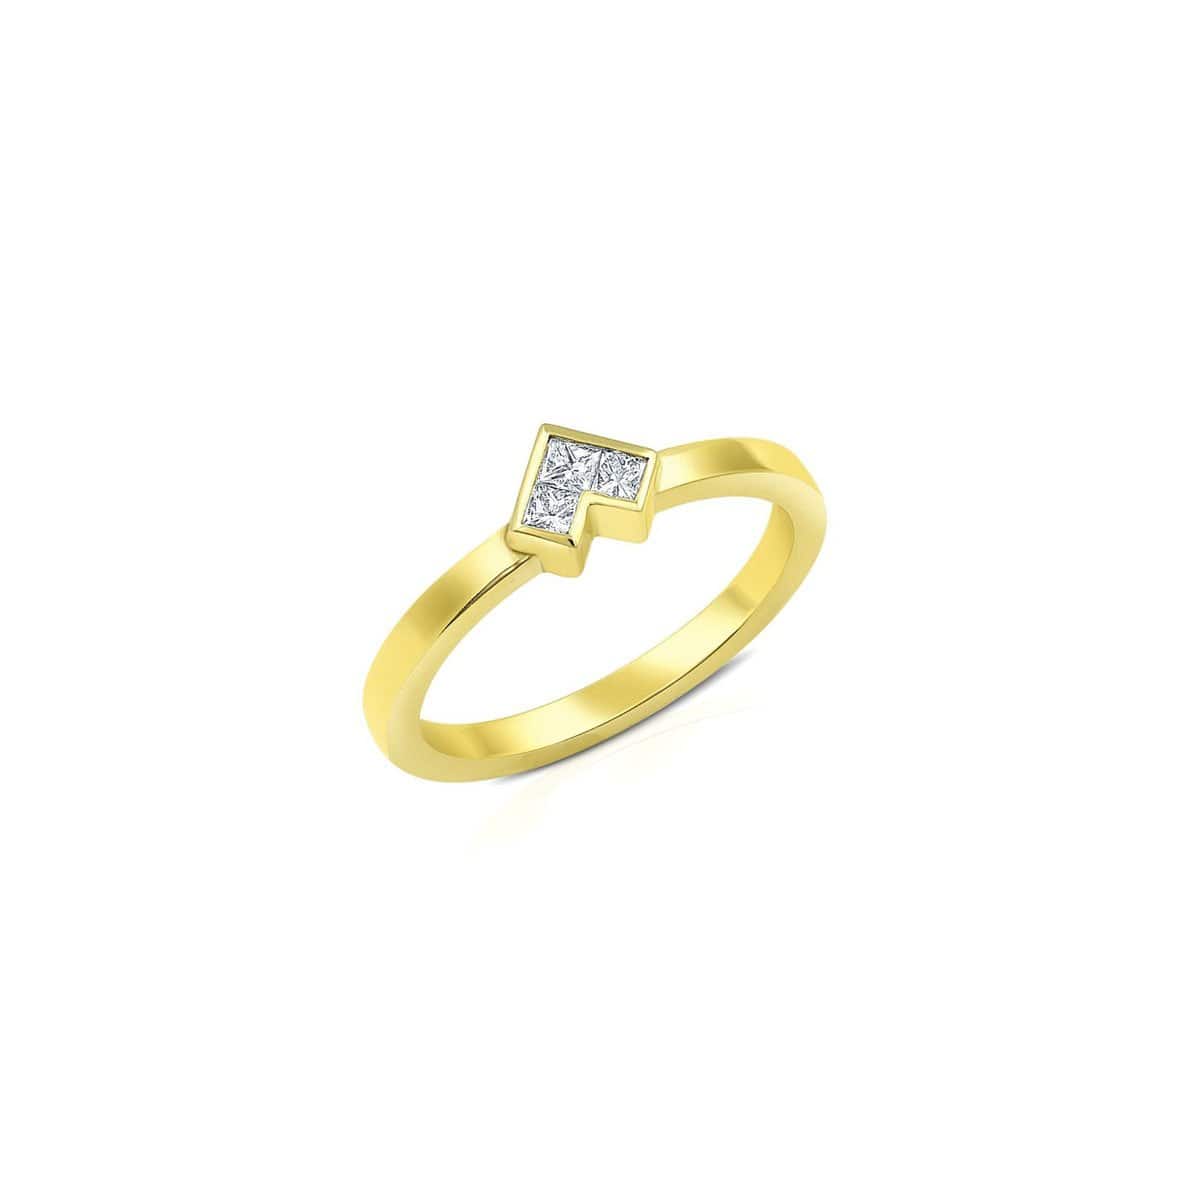 Power of 3 Yellow Gold Ring